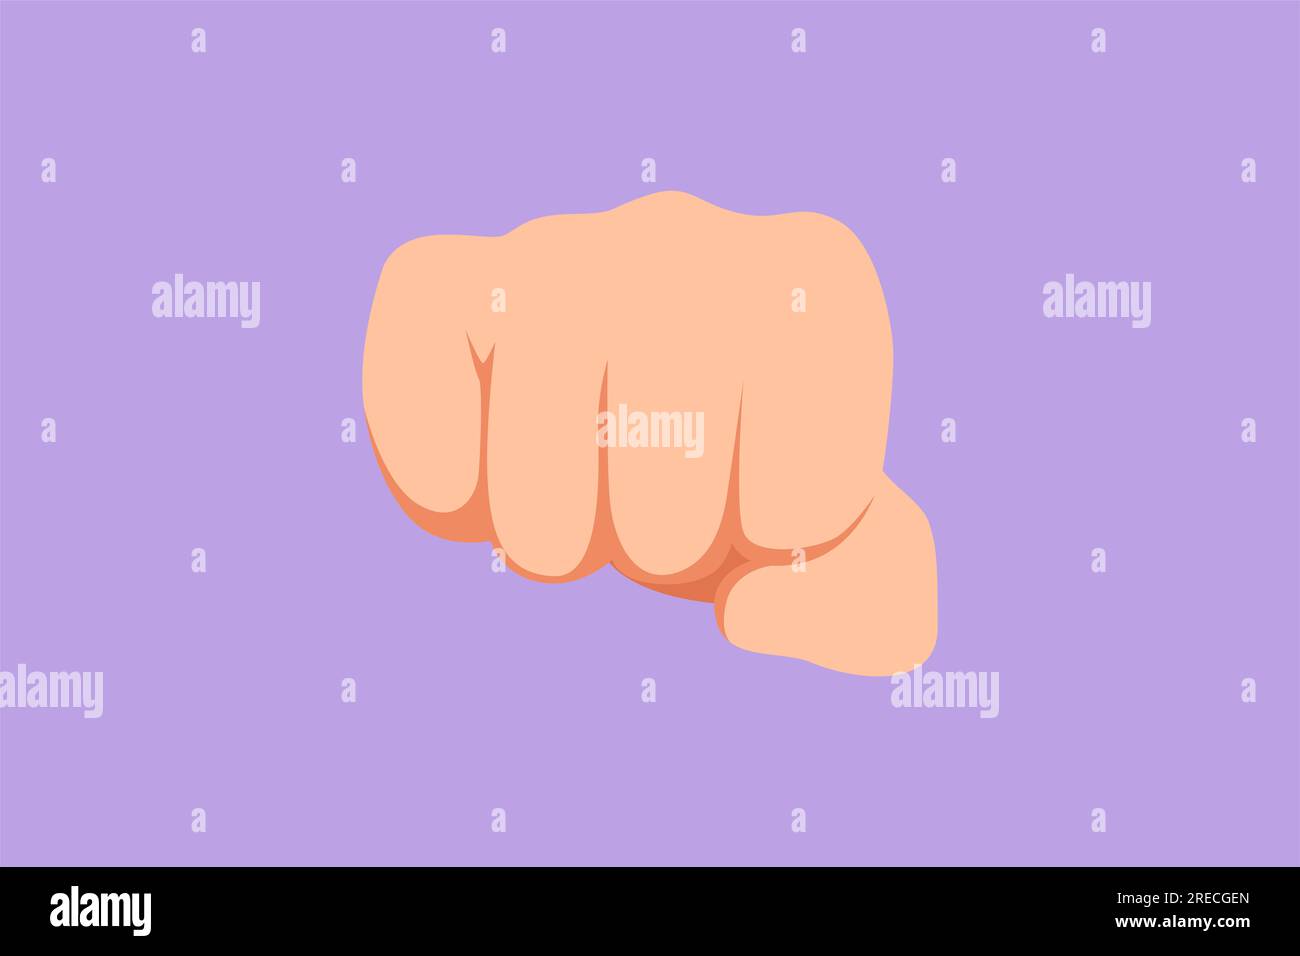 Cartoon flat style drawing punch fist hand gesture. Sign or symbol of power, hitting, attack, force. Communication with hand gestures. Nonverbal signs Stock Photo